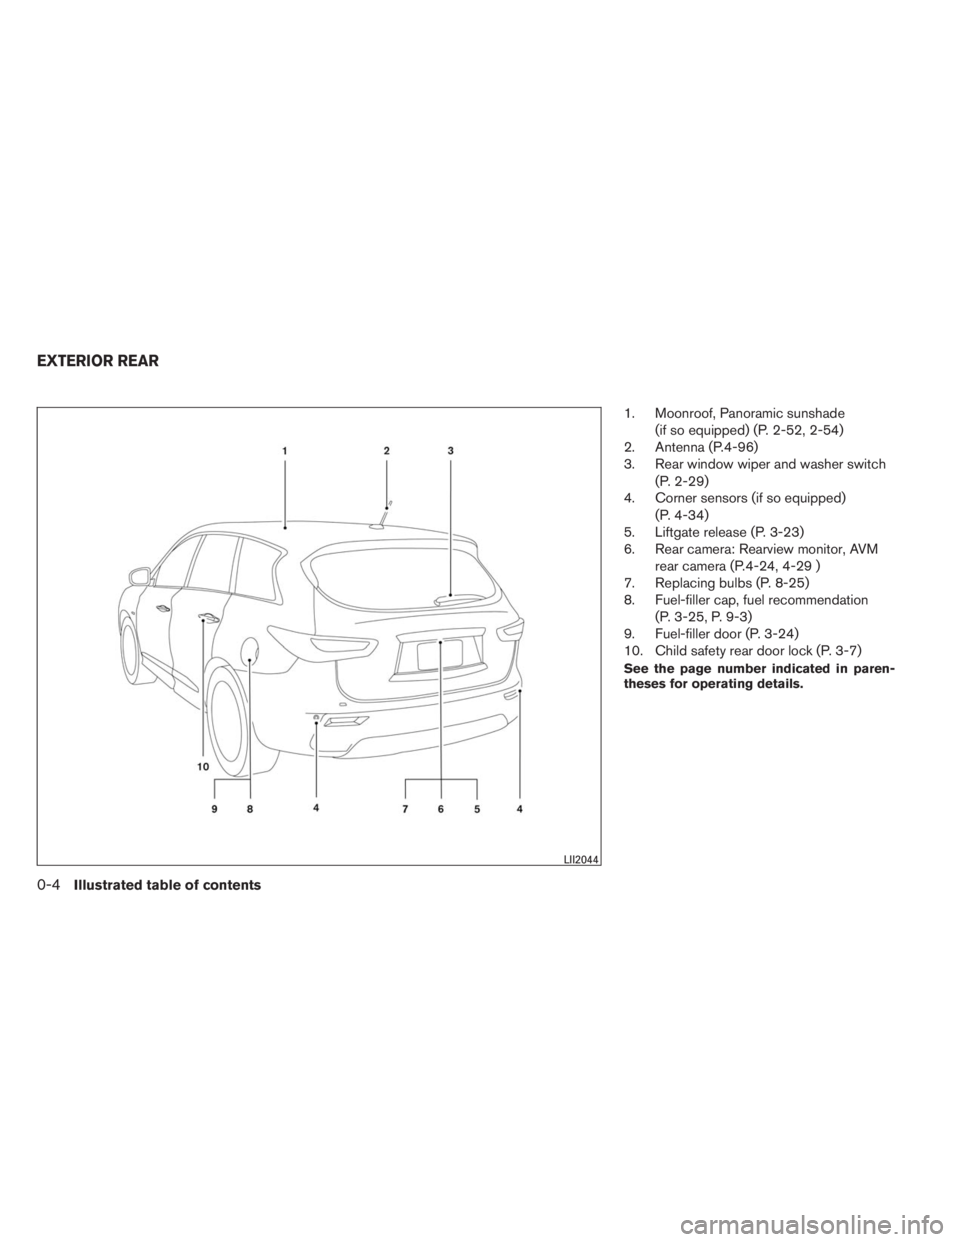 INFINITI QX60 2014 User Guide 1. Moonroof, Panoramic sunshade
(if so equipped) (P. 2-52, 2-54)
2. Antenna (P.4-96)
3. Rear window wiper and washer switch
(P. 2-29)
4. Corner sensors (if so equipped)
(P. 4-34)
5. Liftgate release (